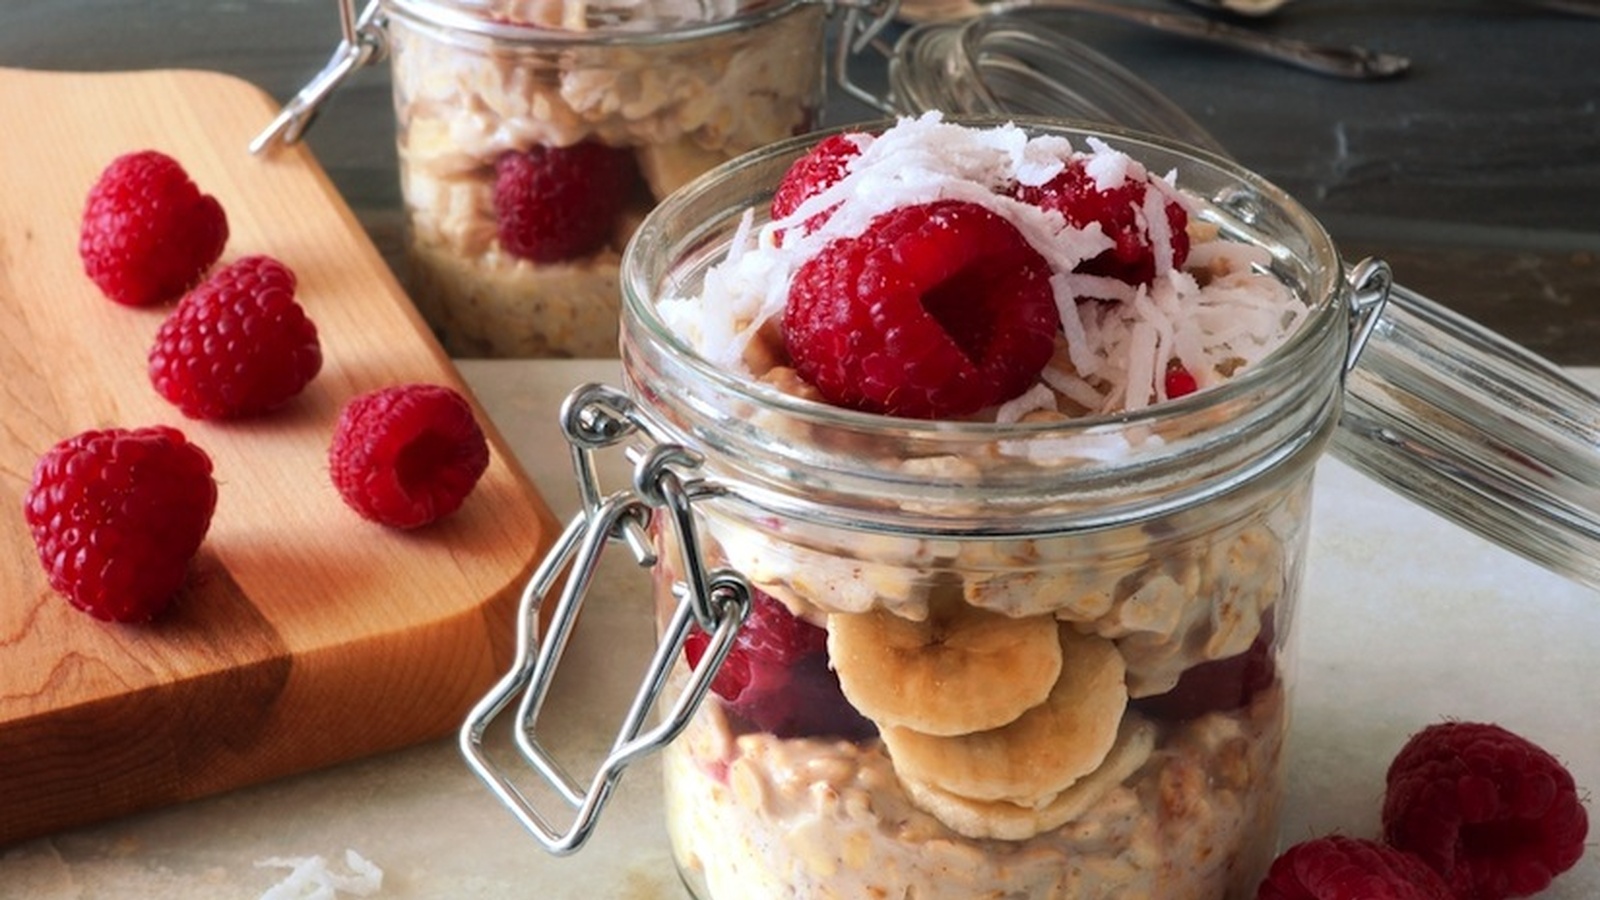 How To: Overnight Oats 3 Ways!